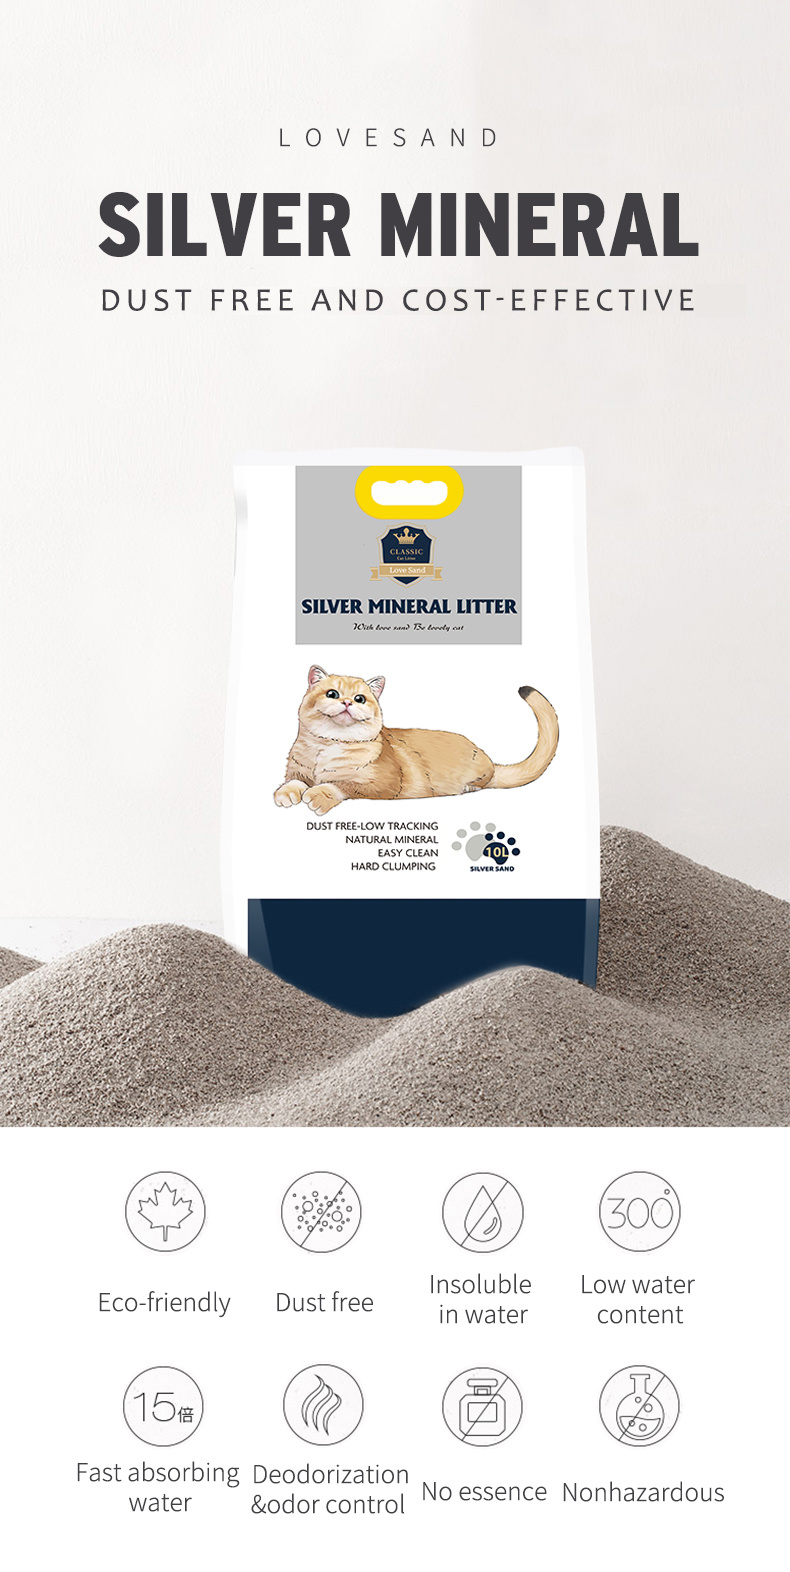 New Idea New Product No Dust Pet Sand for Pet Products Deal